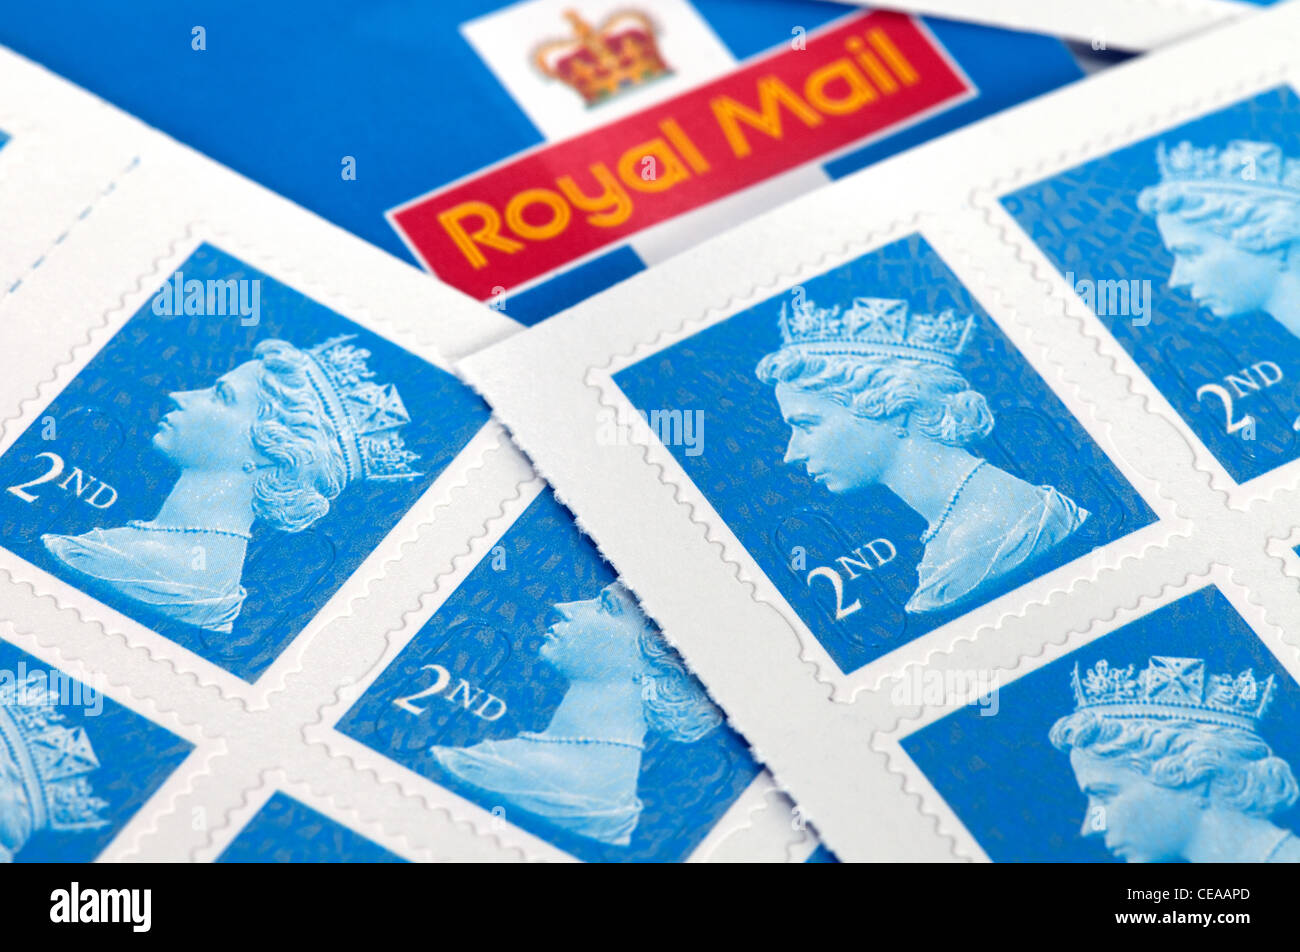 English Second class postage stamps, UK Stock Photo